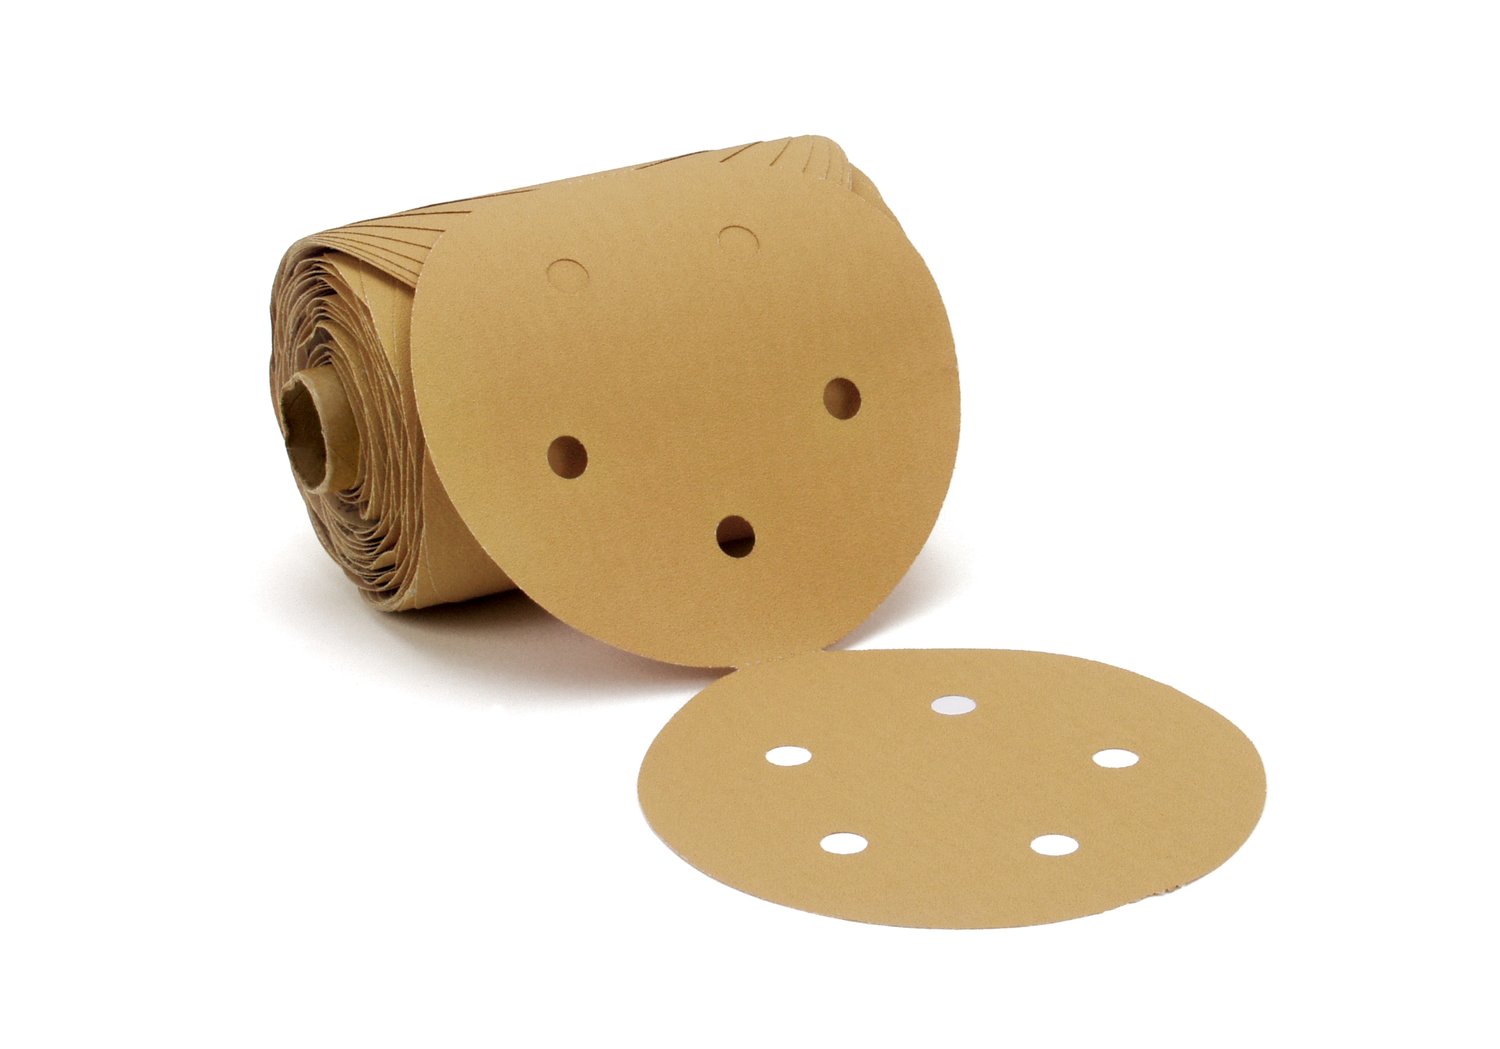 7010360069 - 3M Stikit Gold Paper Disc Roll 216U, 5 in x NH 5 Holes P100 A-weight,
D/F, Die 500FH, 125 Discs/Roll, 10 Rolls/Case